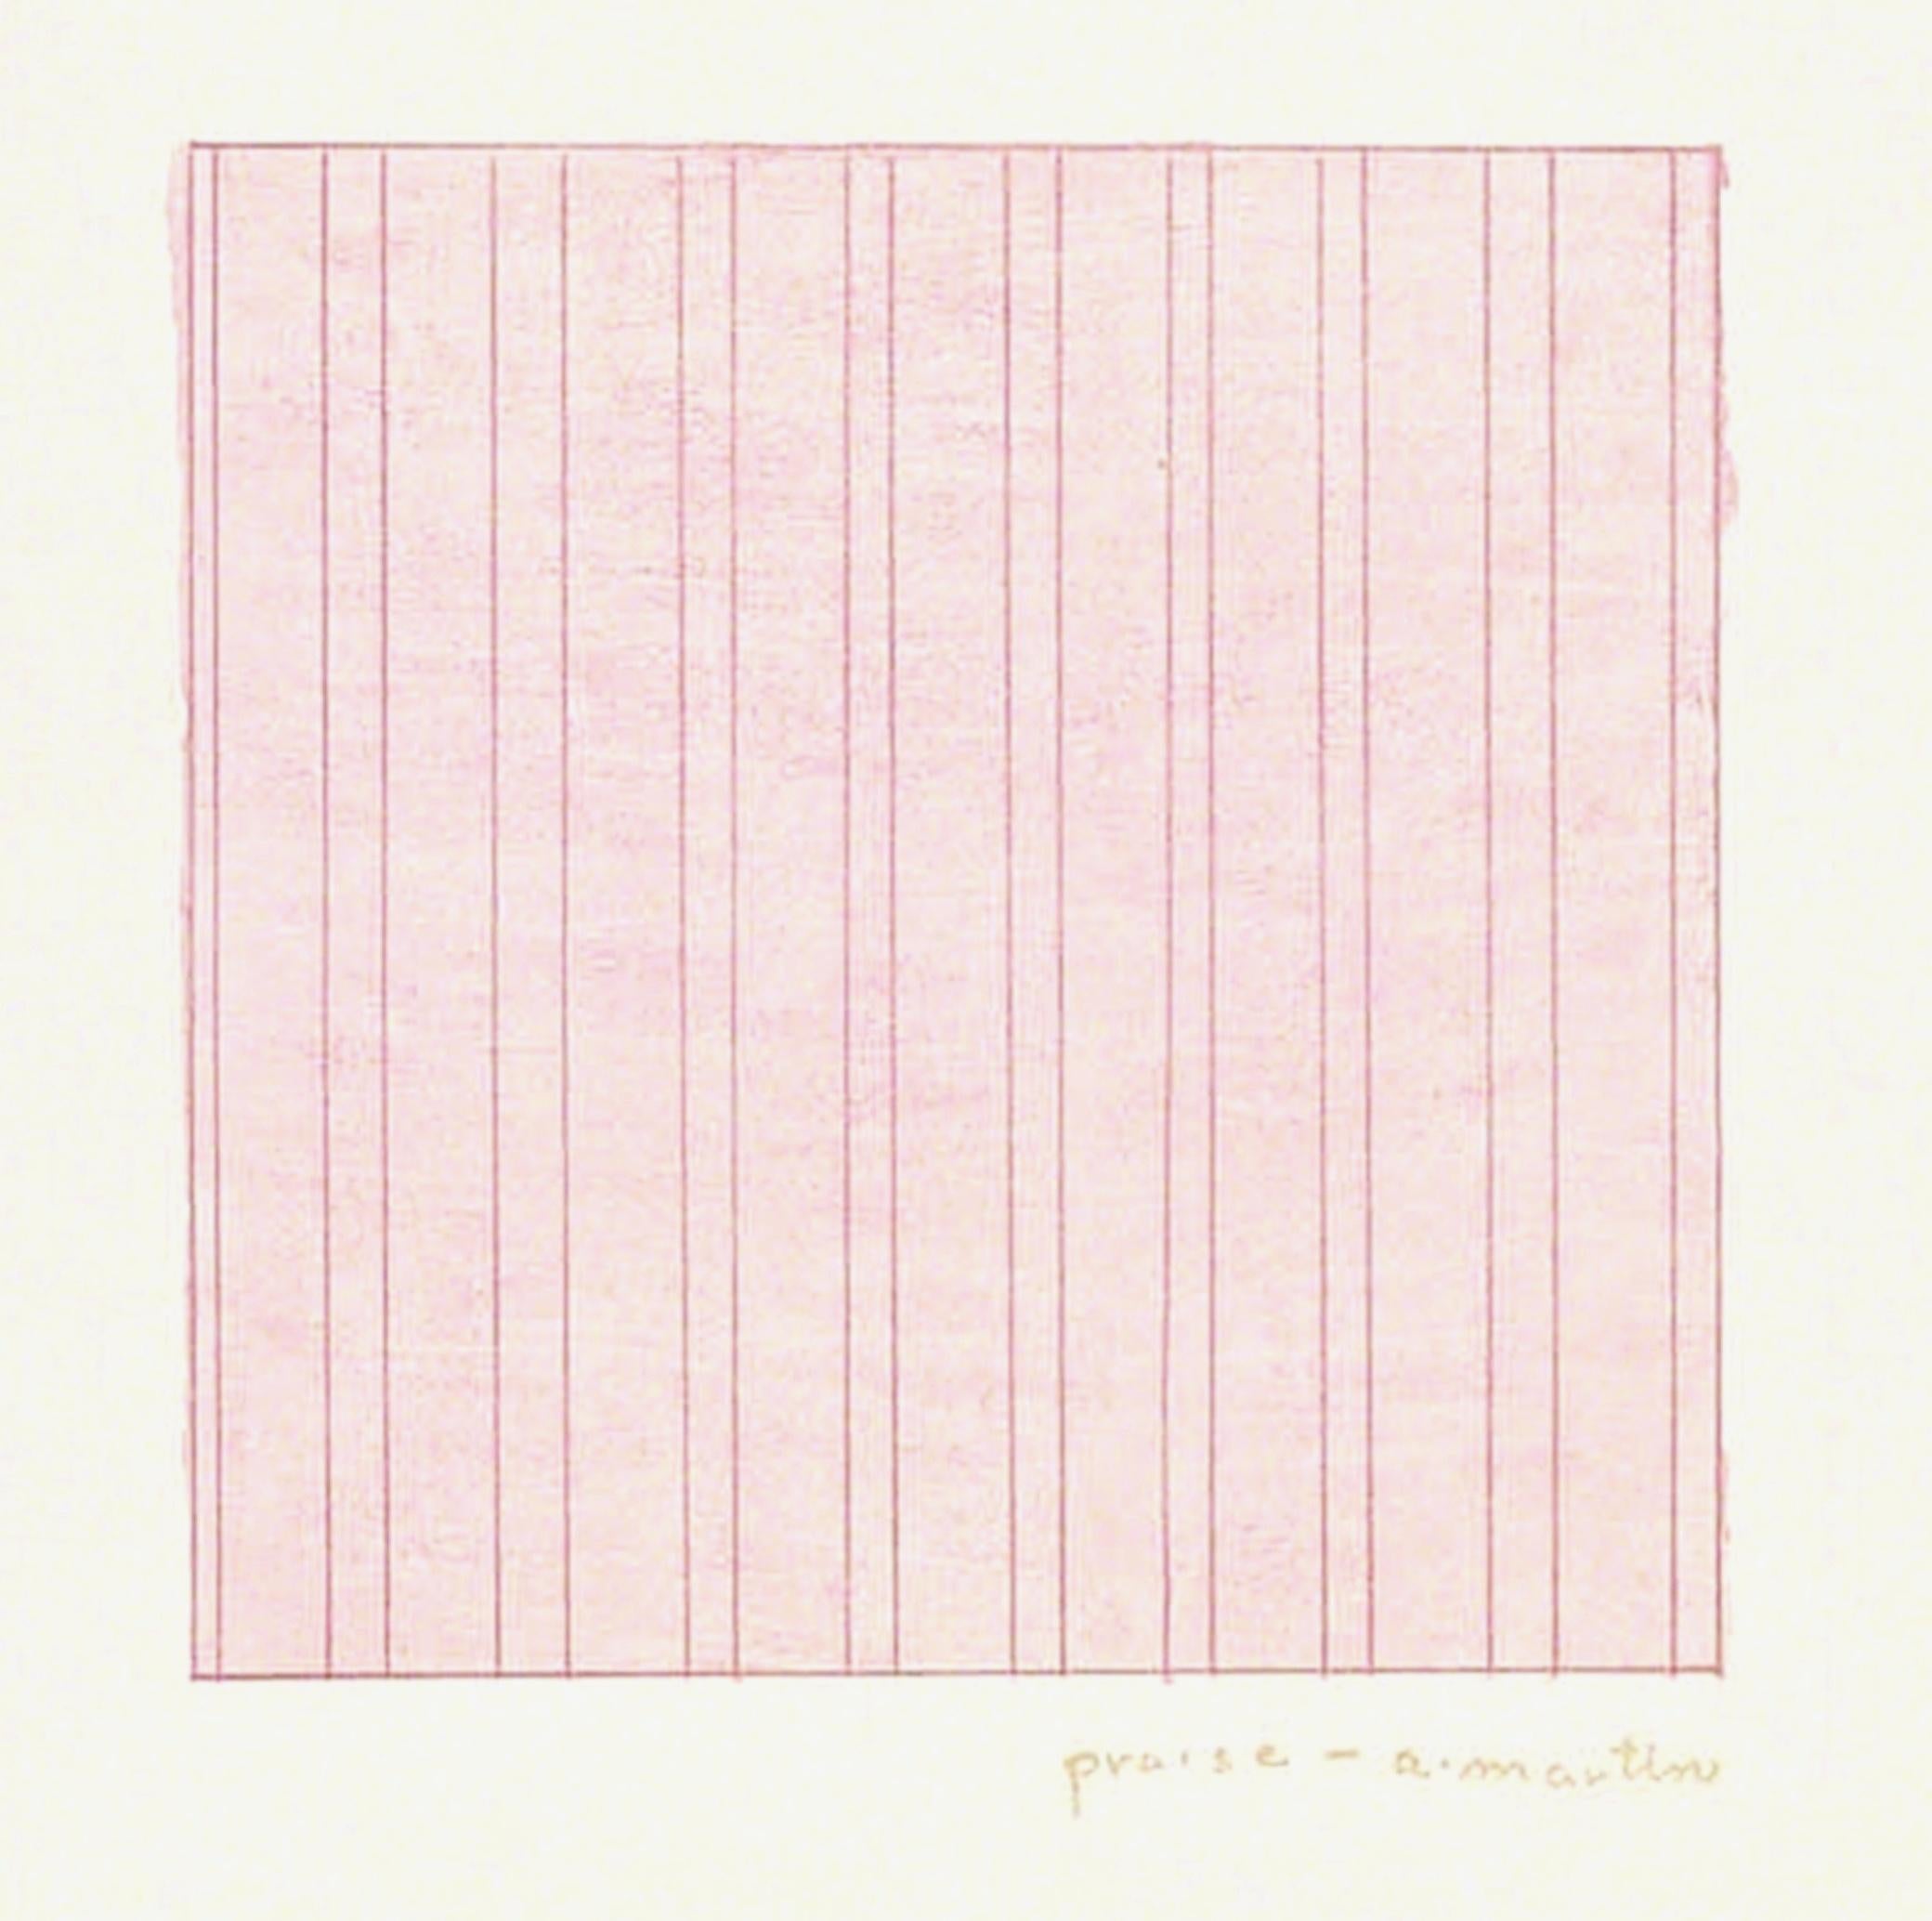 Agnes Martin
Praise (Framed), 1976
Limited edition lithograph on Dalton Natural Bond paper with gold rubber stamp signature, accompanied by the original sleeve
Agnes Martin's signature is stamped in gold; unnumbered proof
Frame included: framed in a